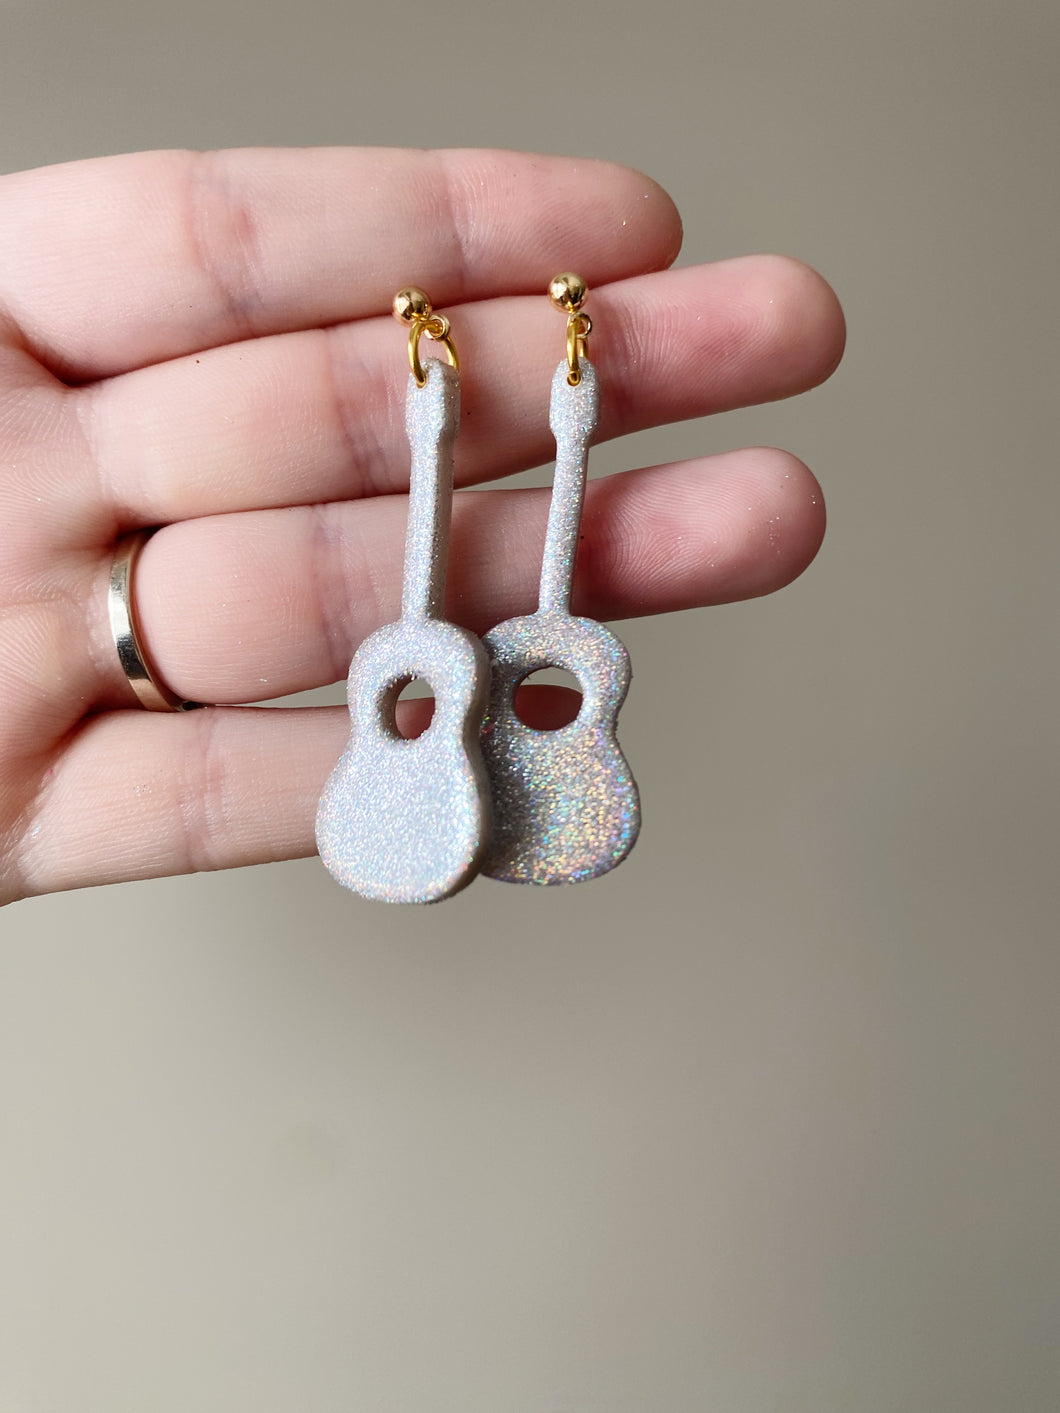 TS inspired, Sparkly Guitar | Handmade Polymer Clay Earrings